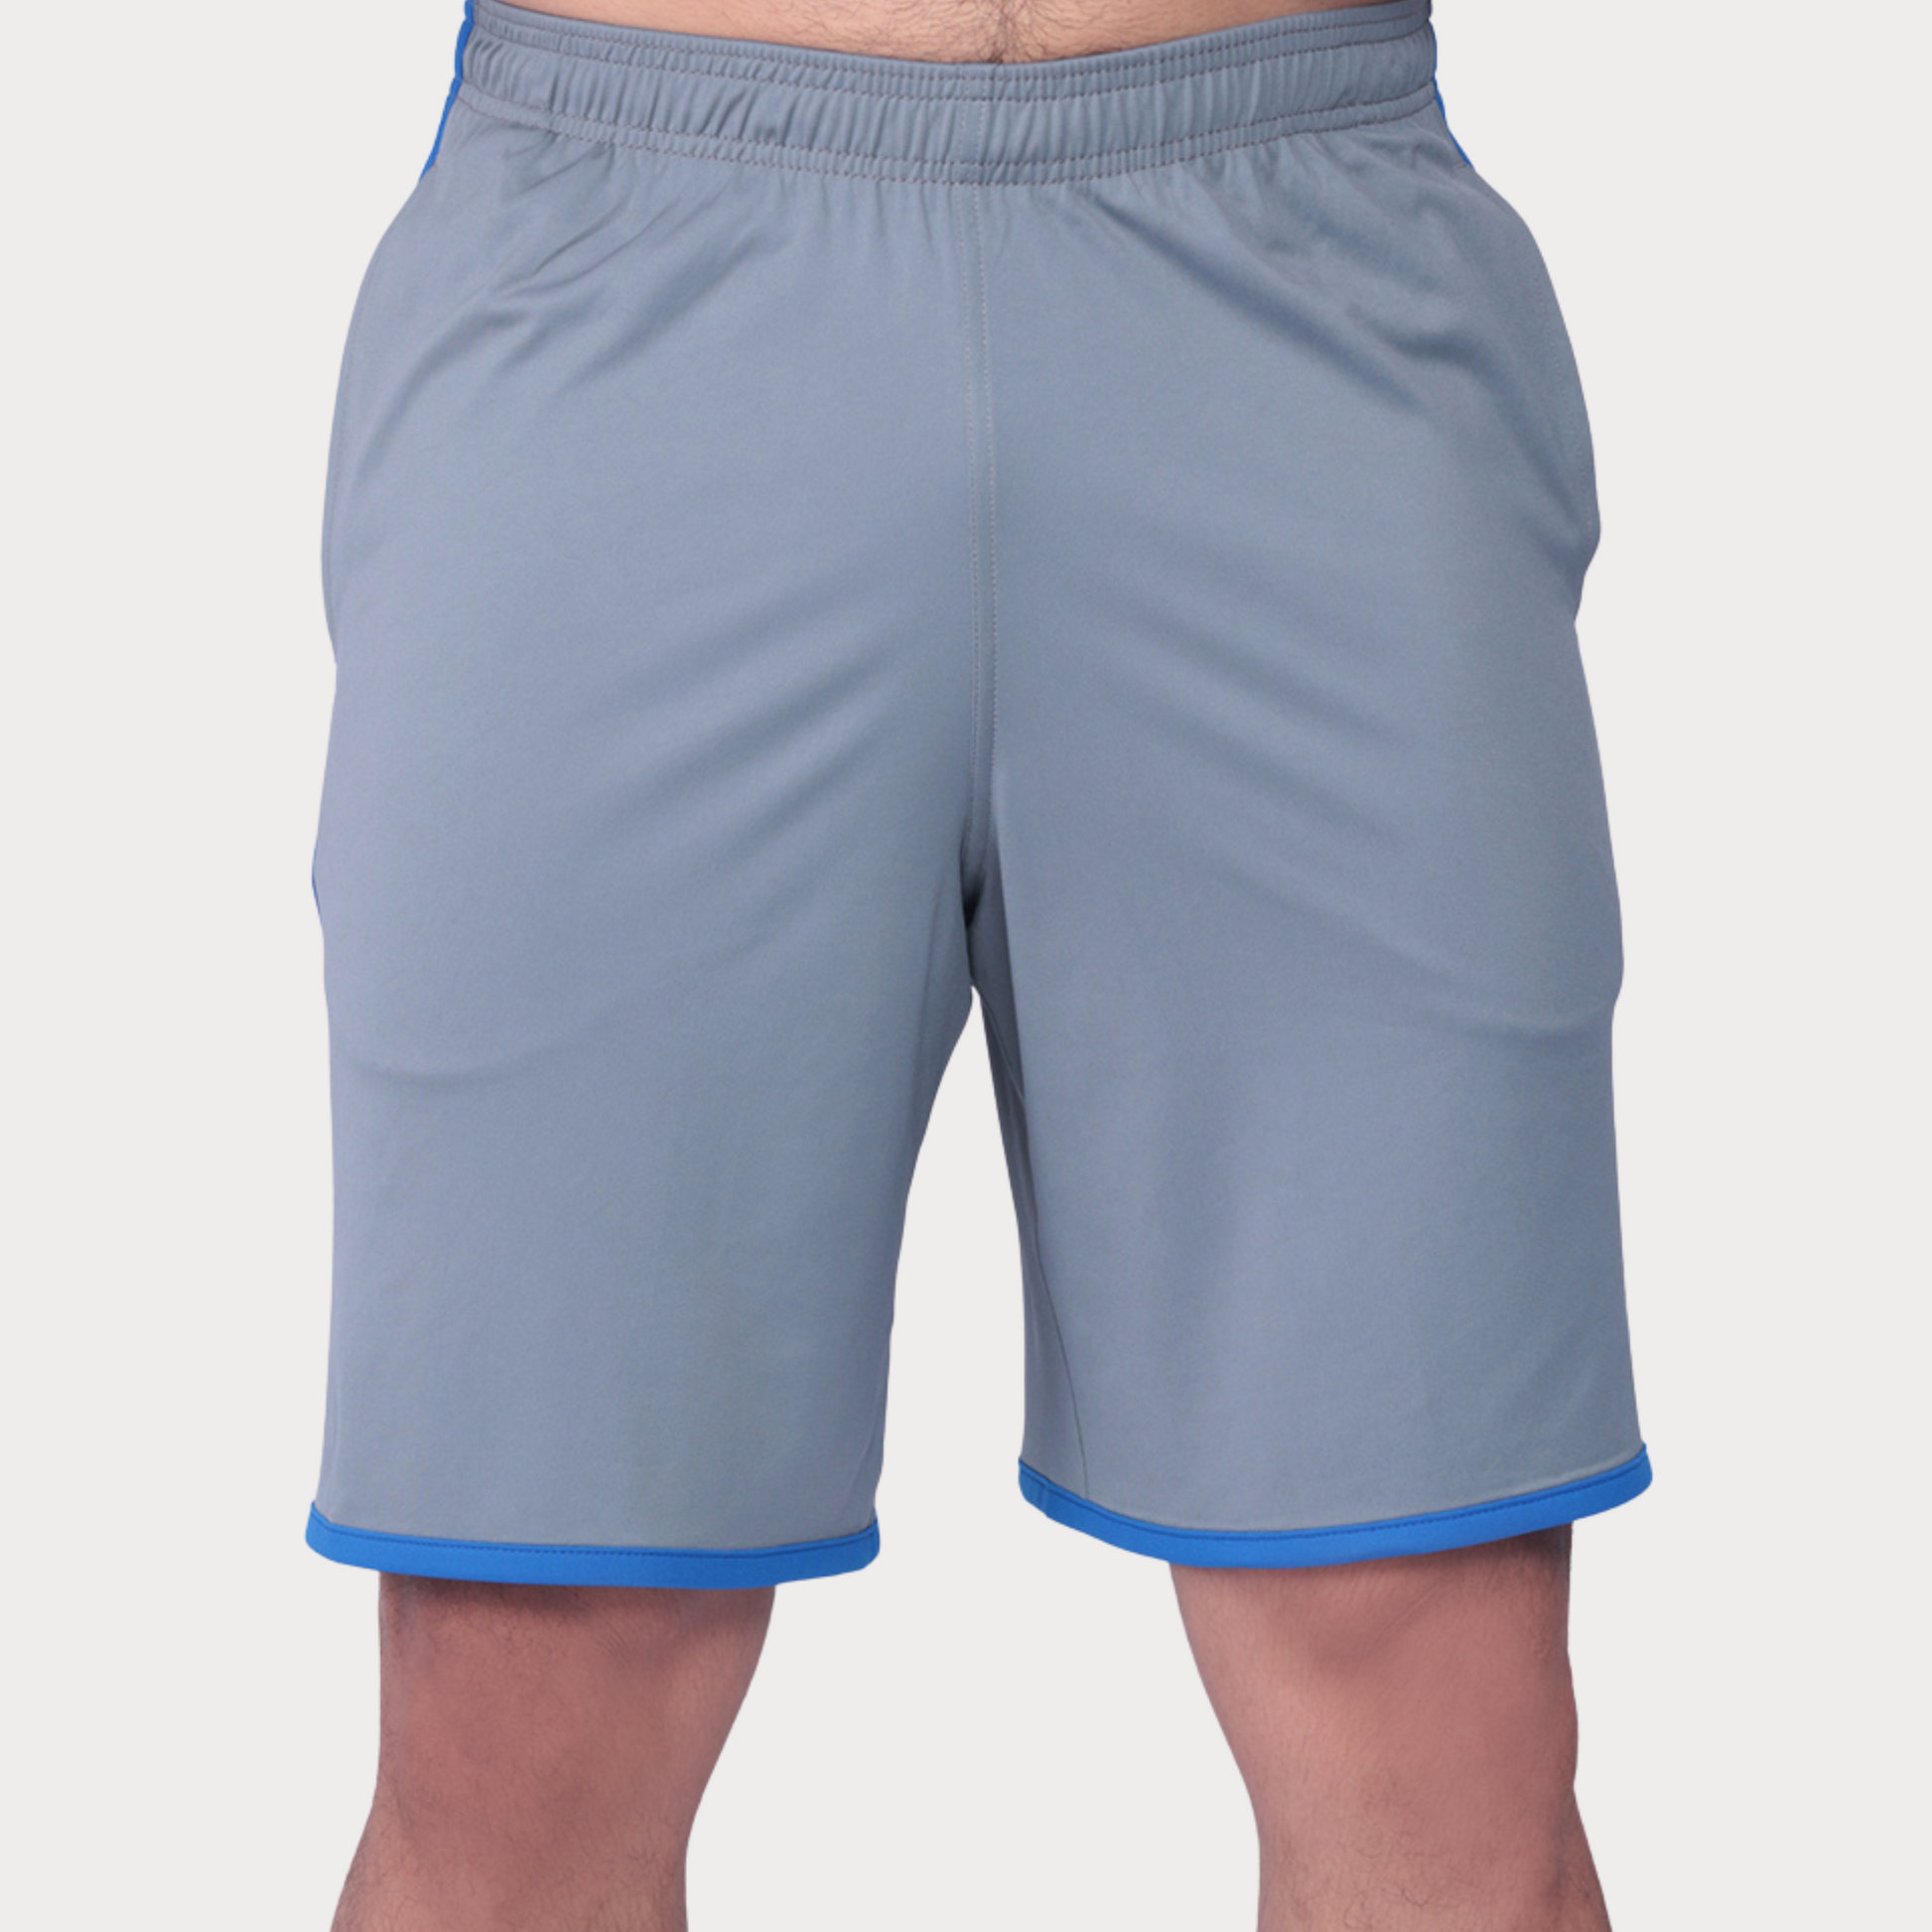 Shorts Activewear / Sportswear - Men's Classic Loose Fit Shorts - S / Grey - Outperformer